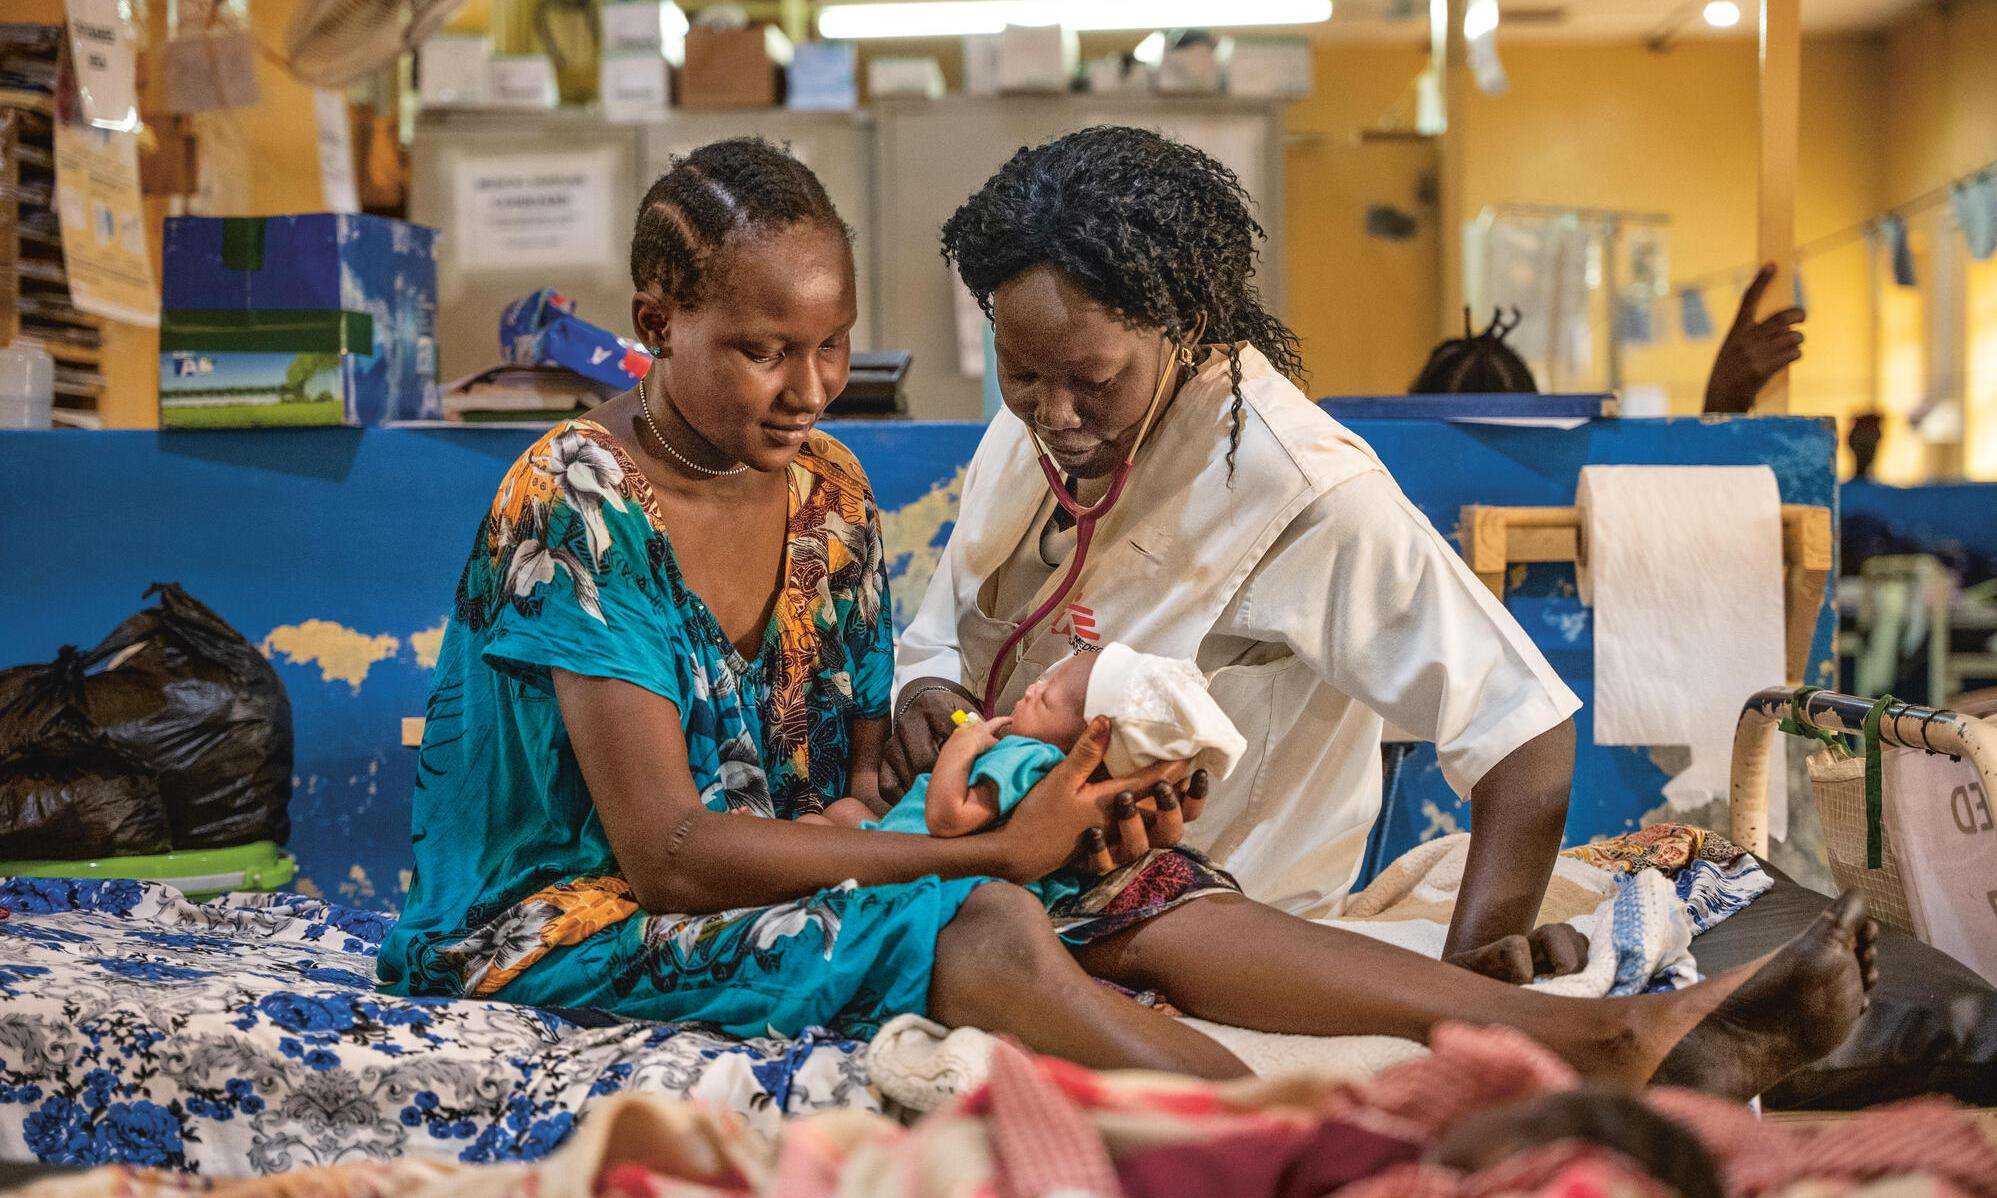 An MSF nurse and patient sit on a hospital bed with a newborn baby in Aweil, South Sudan.